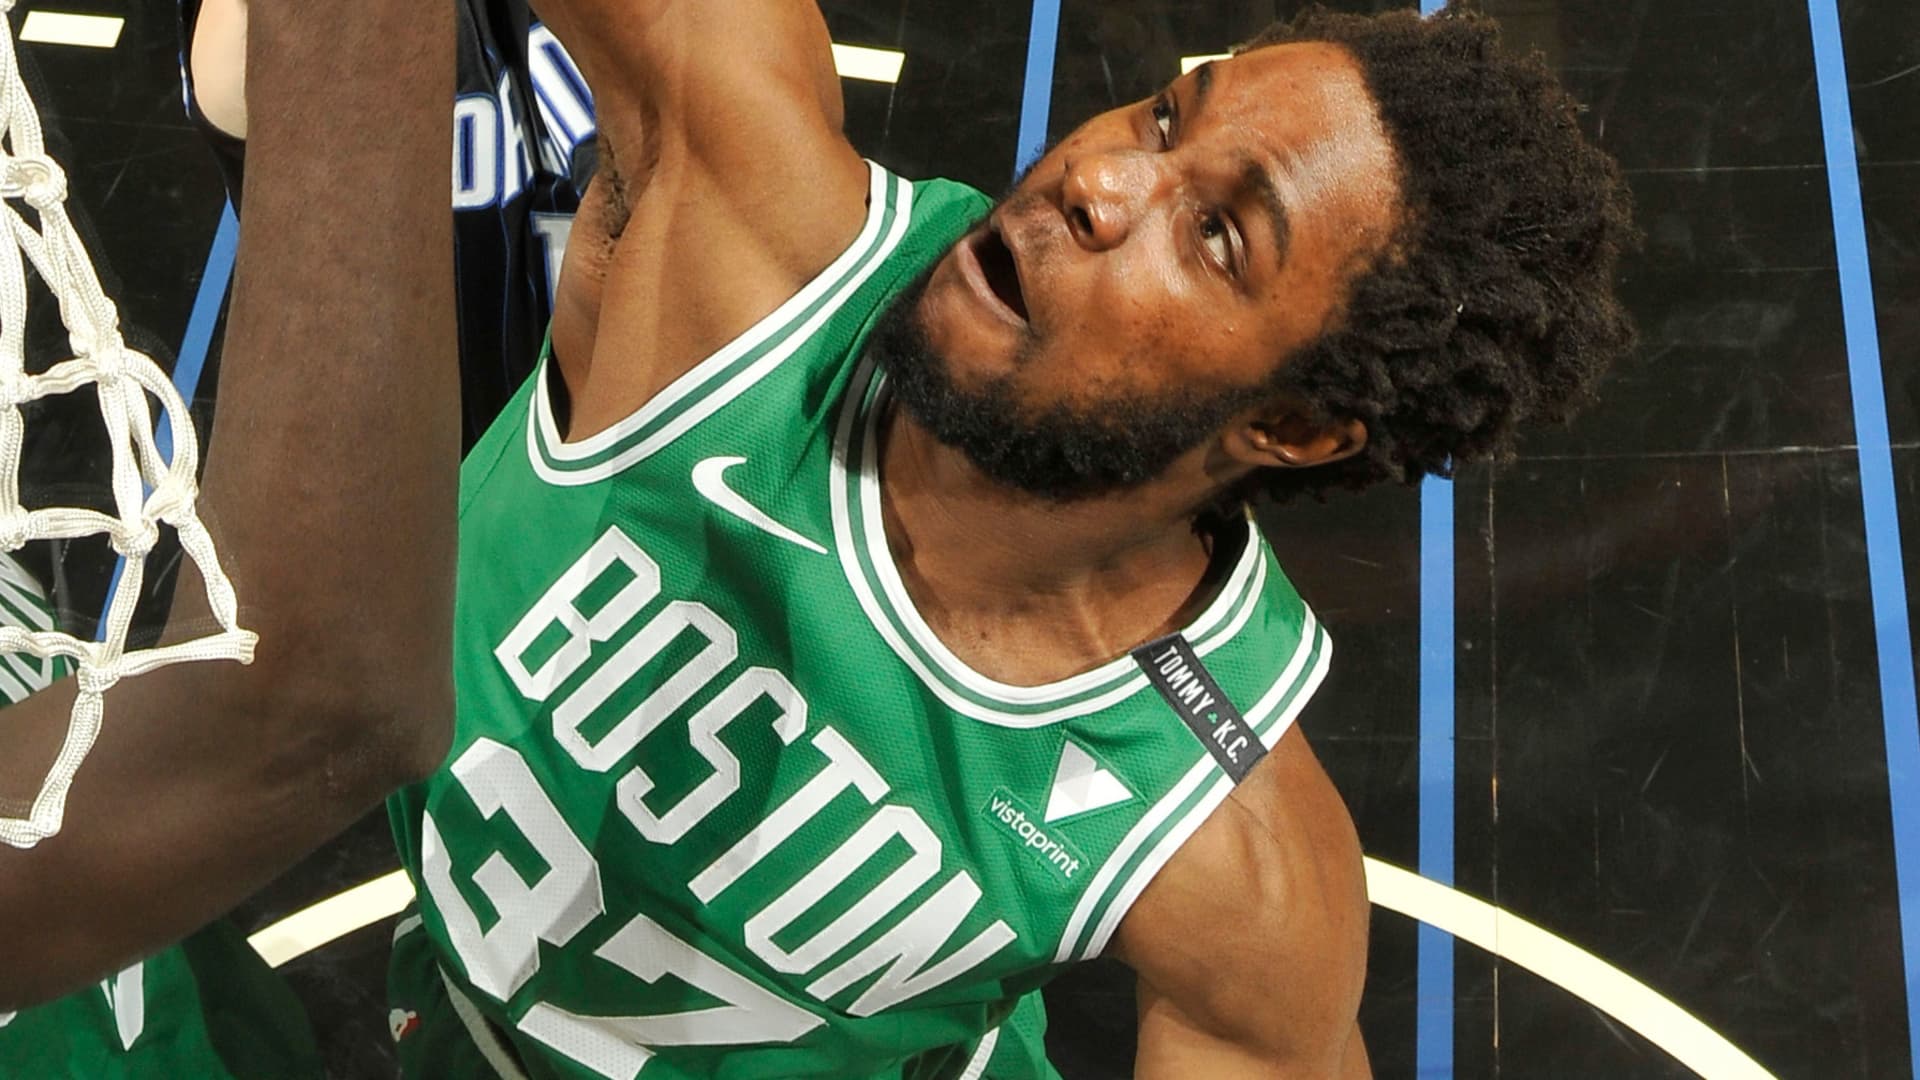 Semi Ojeleye #37 of the Boston Celtics shoots the ball during the game against the Orlando Magic on May 5, 2021 at Amway Center in Orlando, Florida.